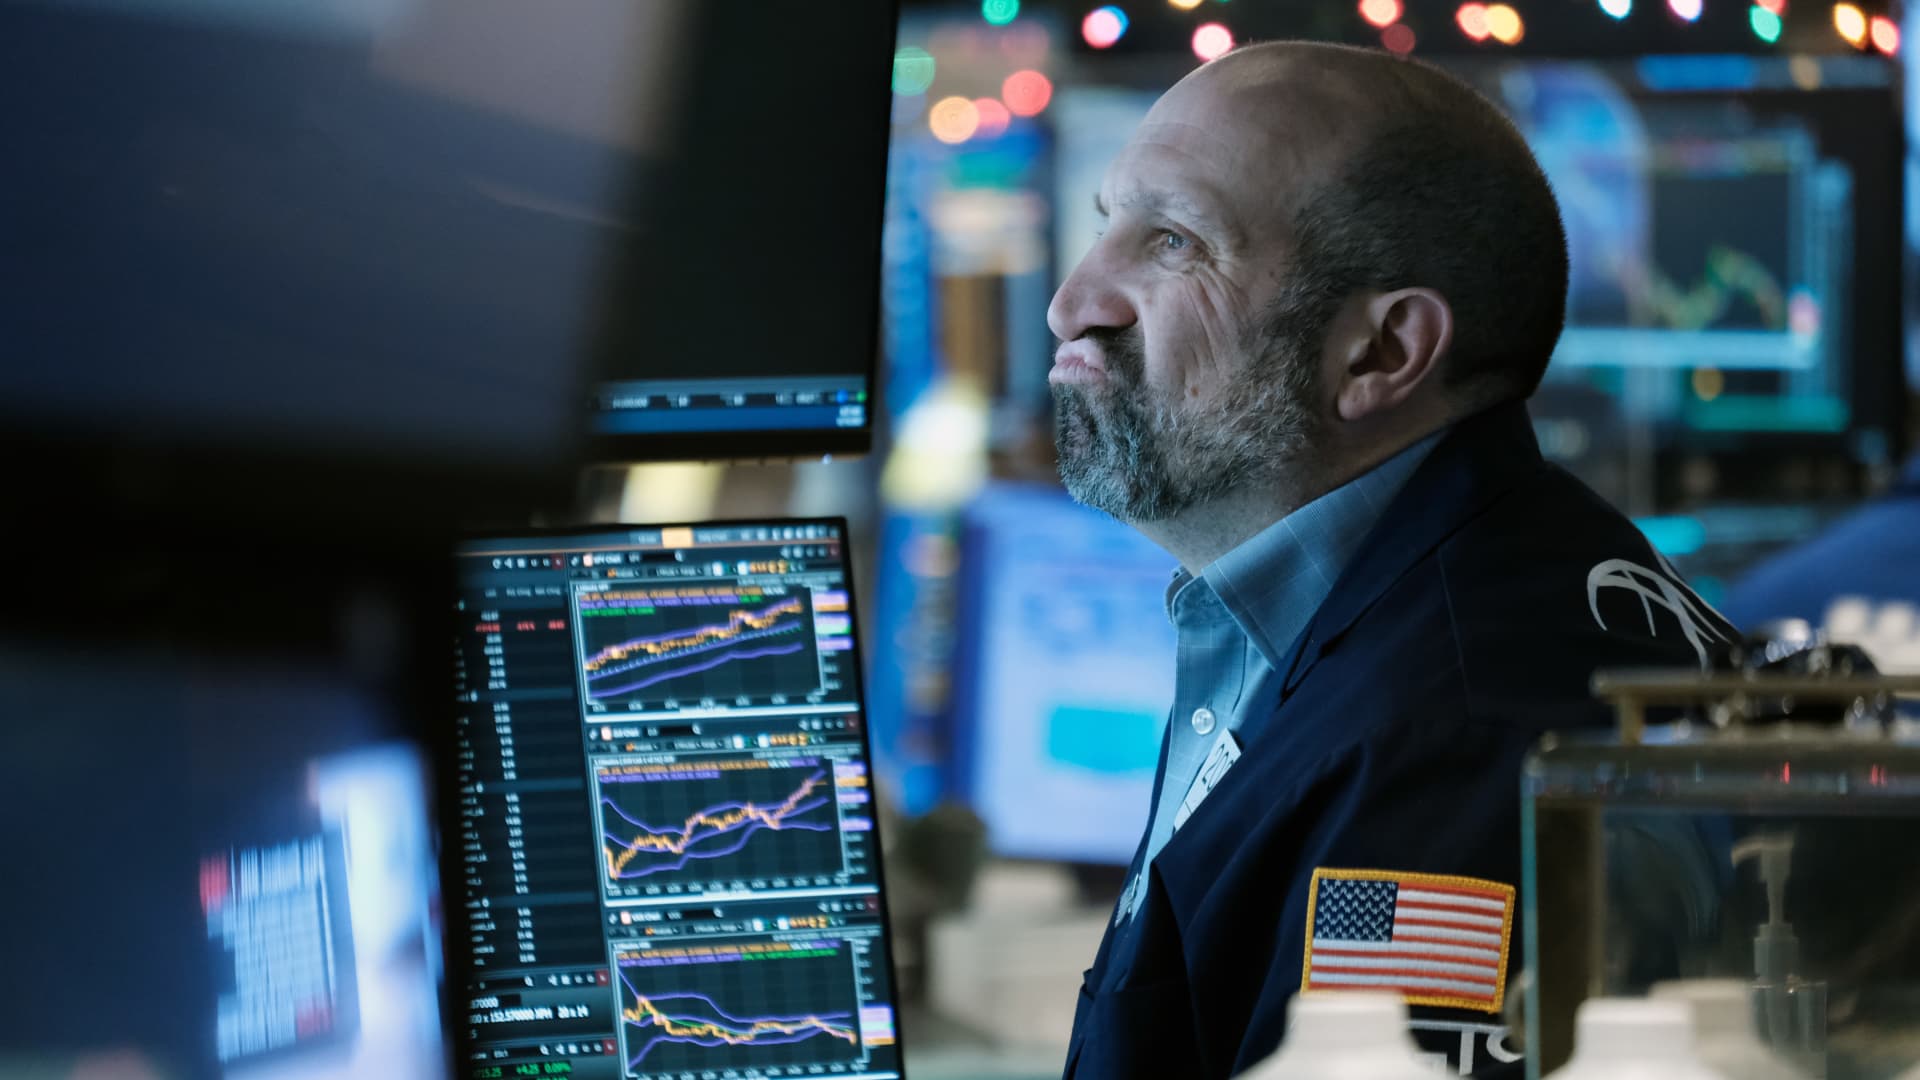 A trader works on the floor of the New York Stock Exchange (NYSE) on December 13, 2021 in New York City.